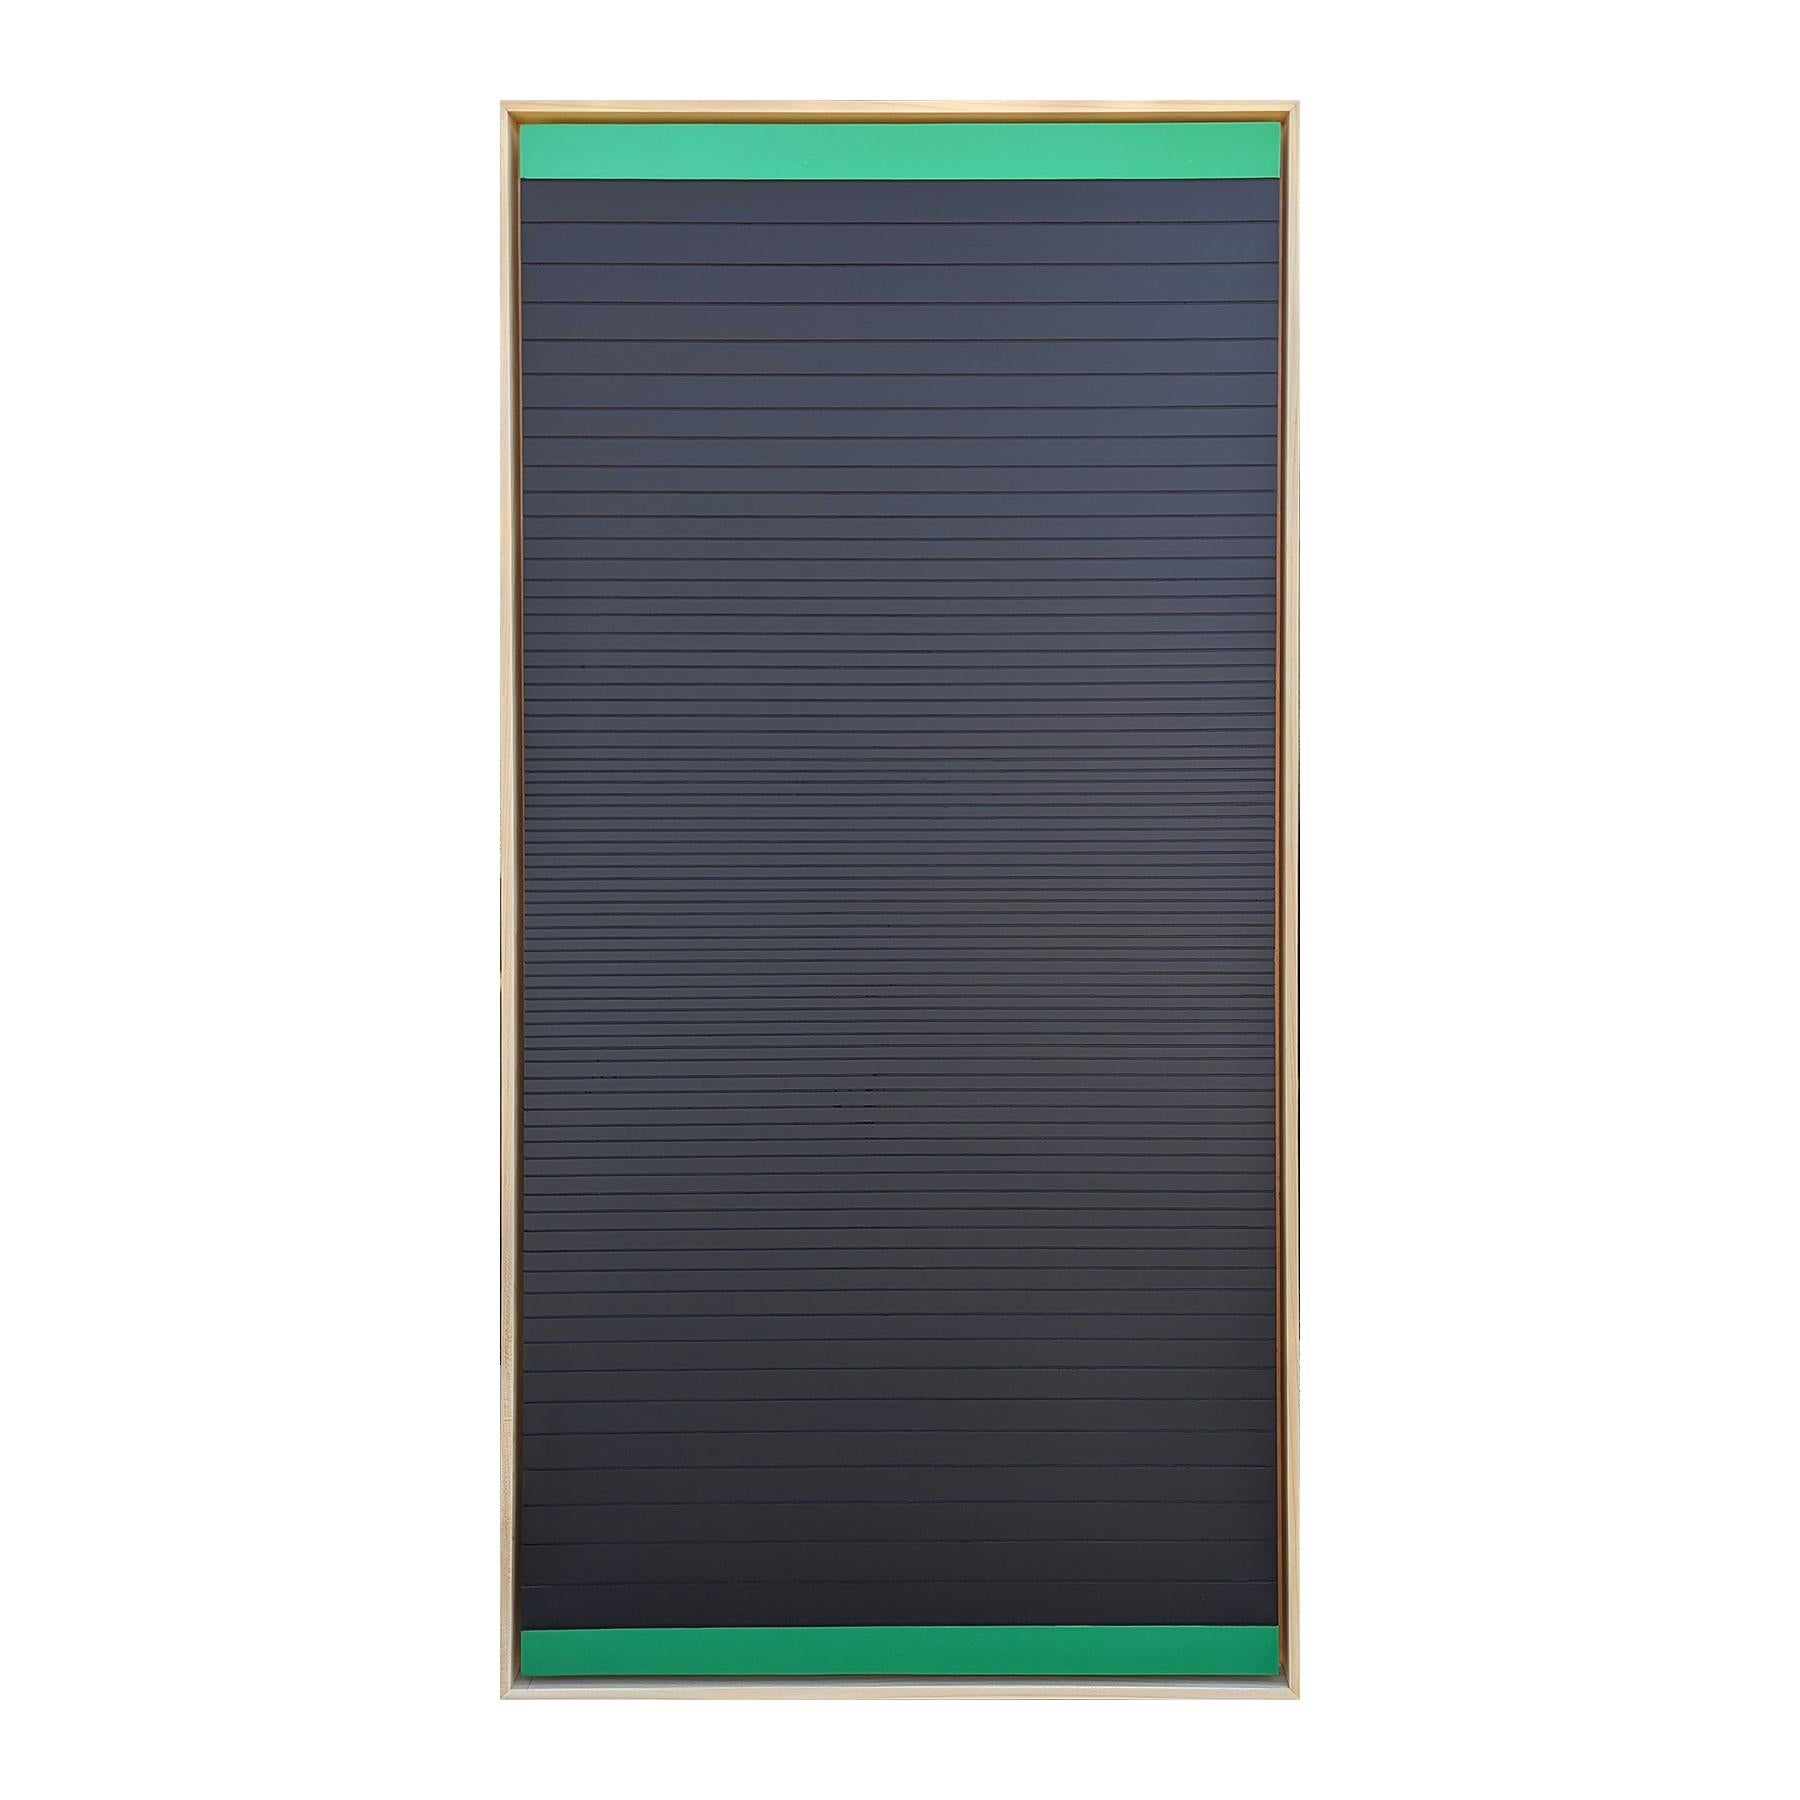 Contemporary Black and Green Linear Abstract Geometric Groove Painting  - Sculpture by Matthew Reeves